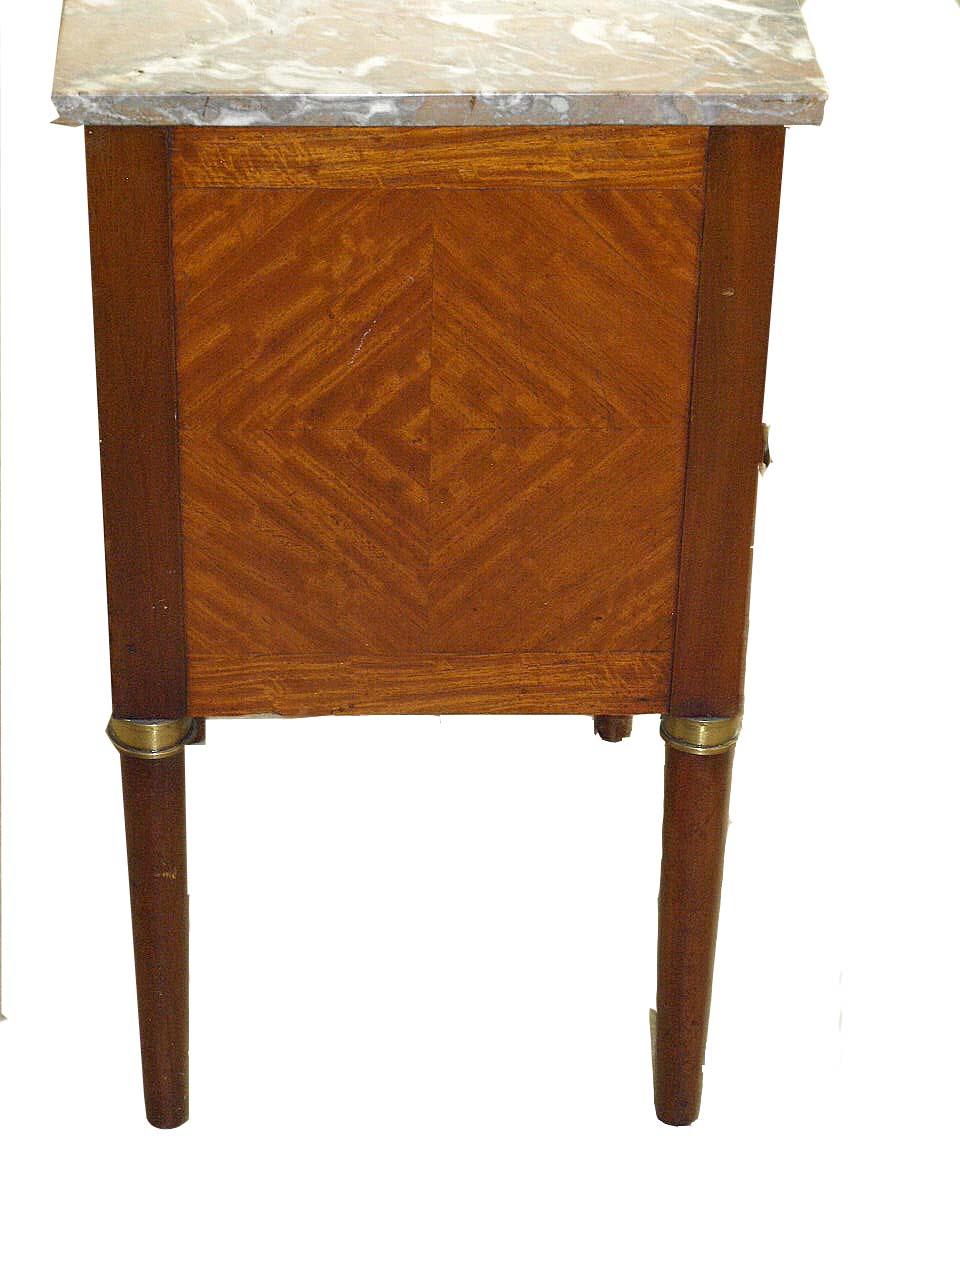 French marble top one drawer stand, the drawer and door are inlaid with ebony and boxwood, and also cross banded around the edges, sides with matching veneer pattern, the round and tapered legs with brass caps at the top.